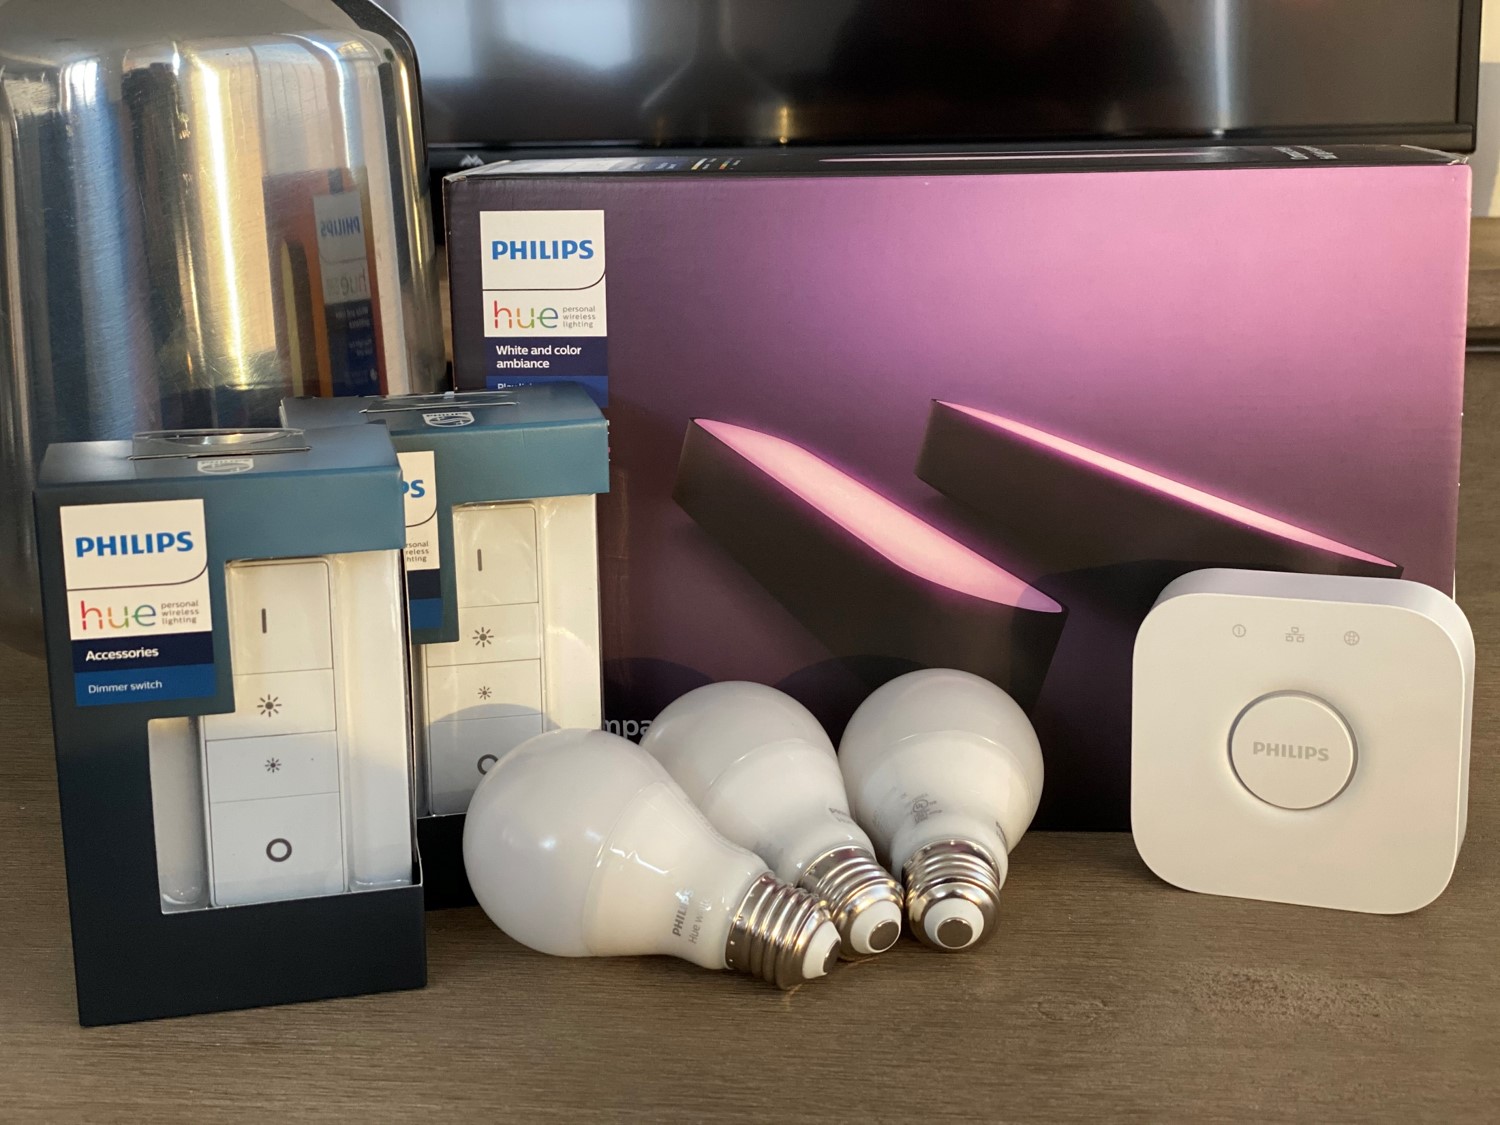 Philips Hue Lightstrip Plus Unboxing Install & Review 